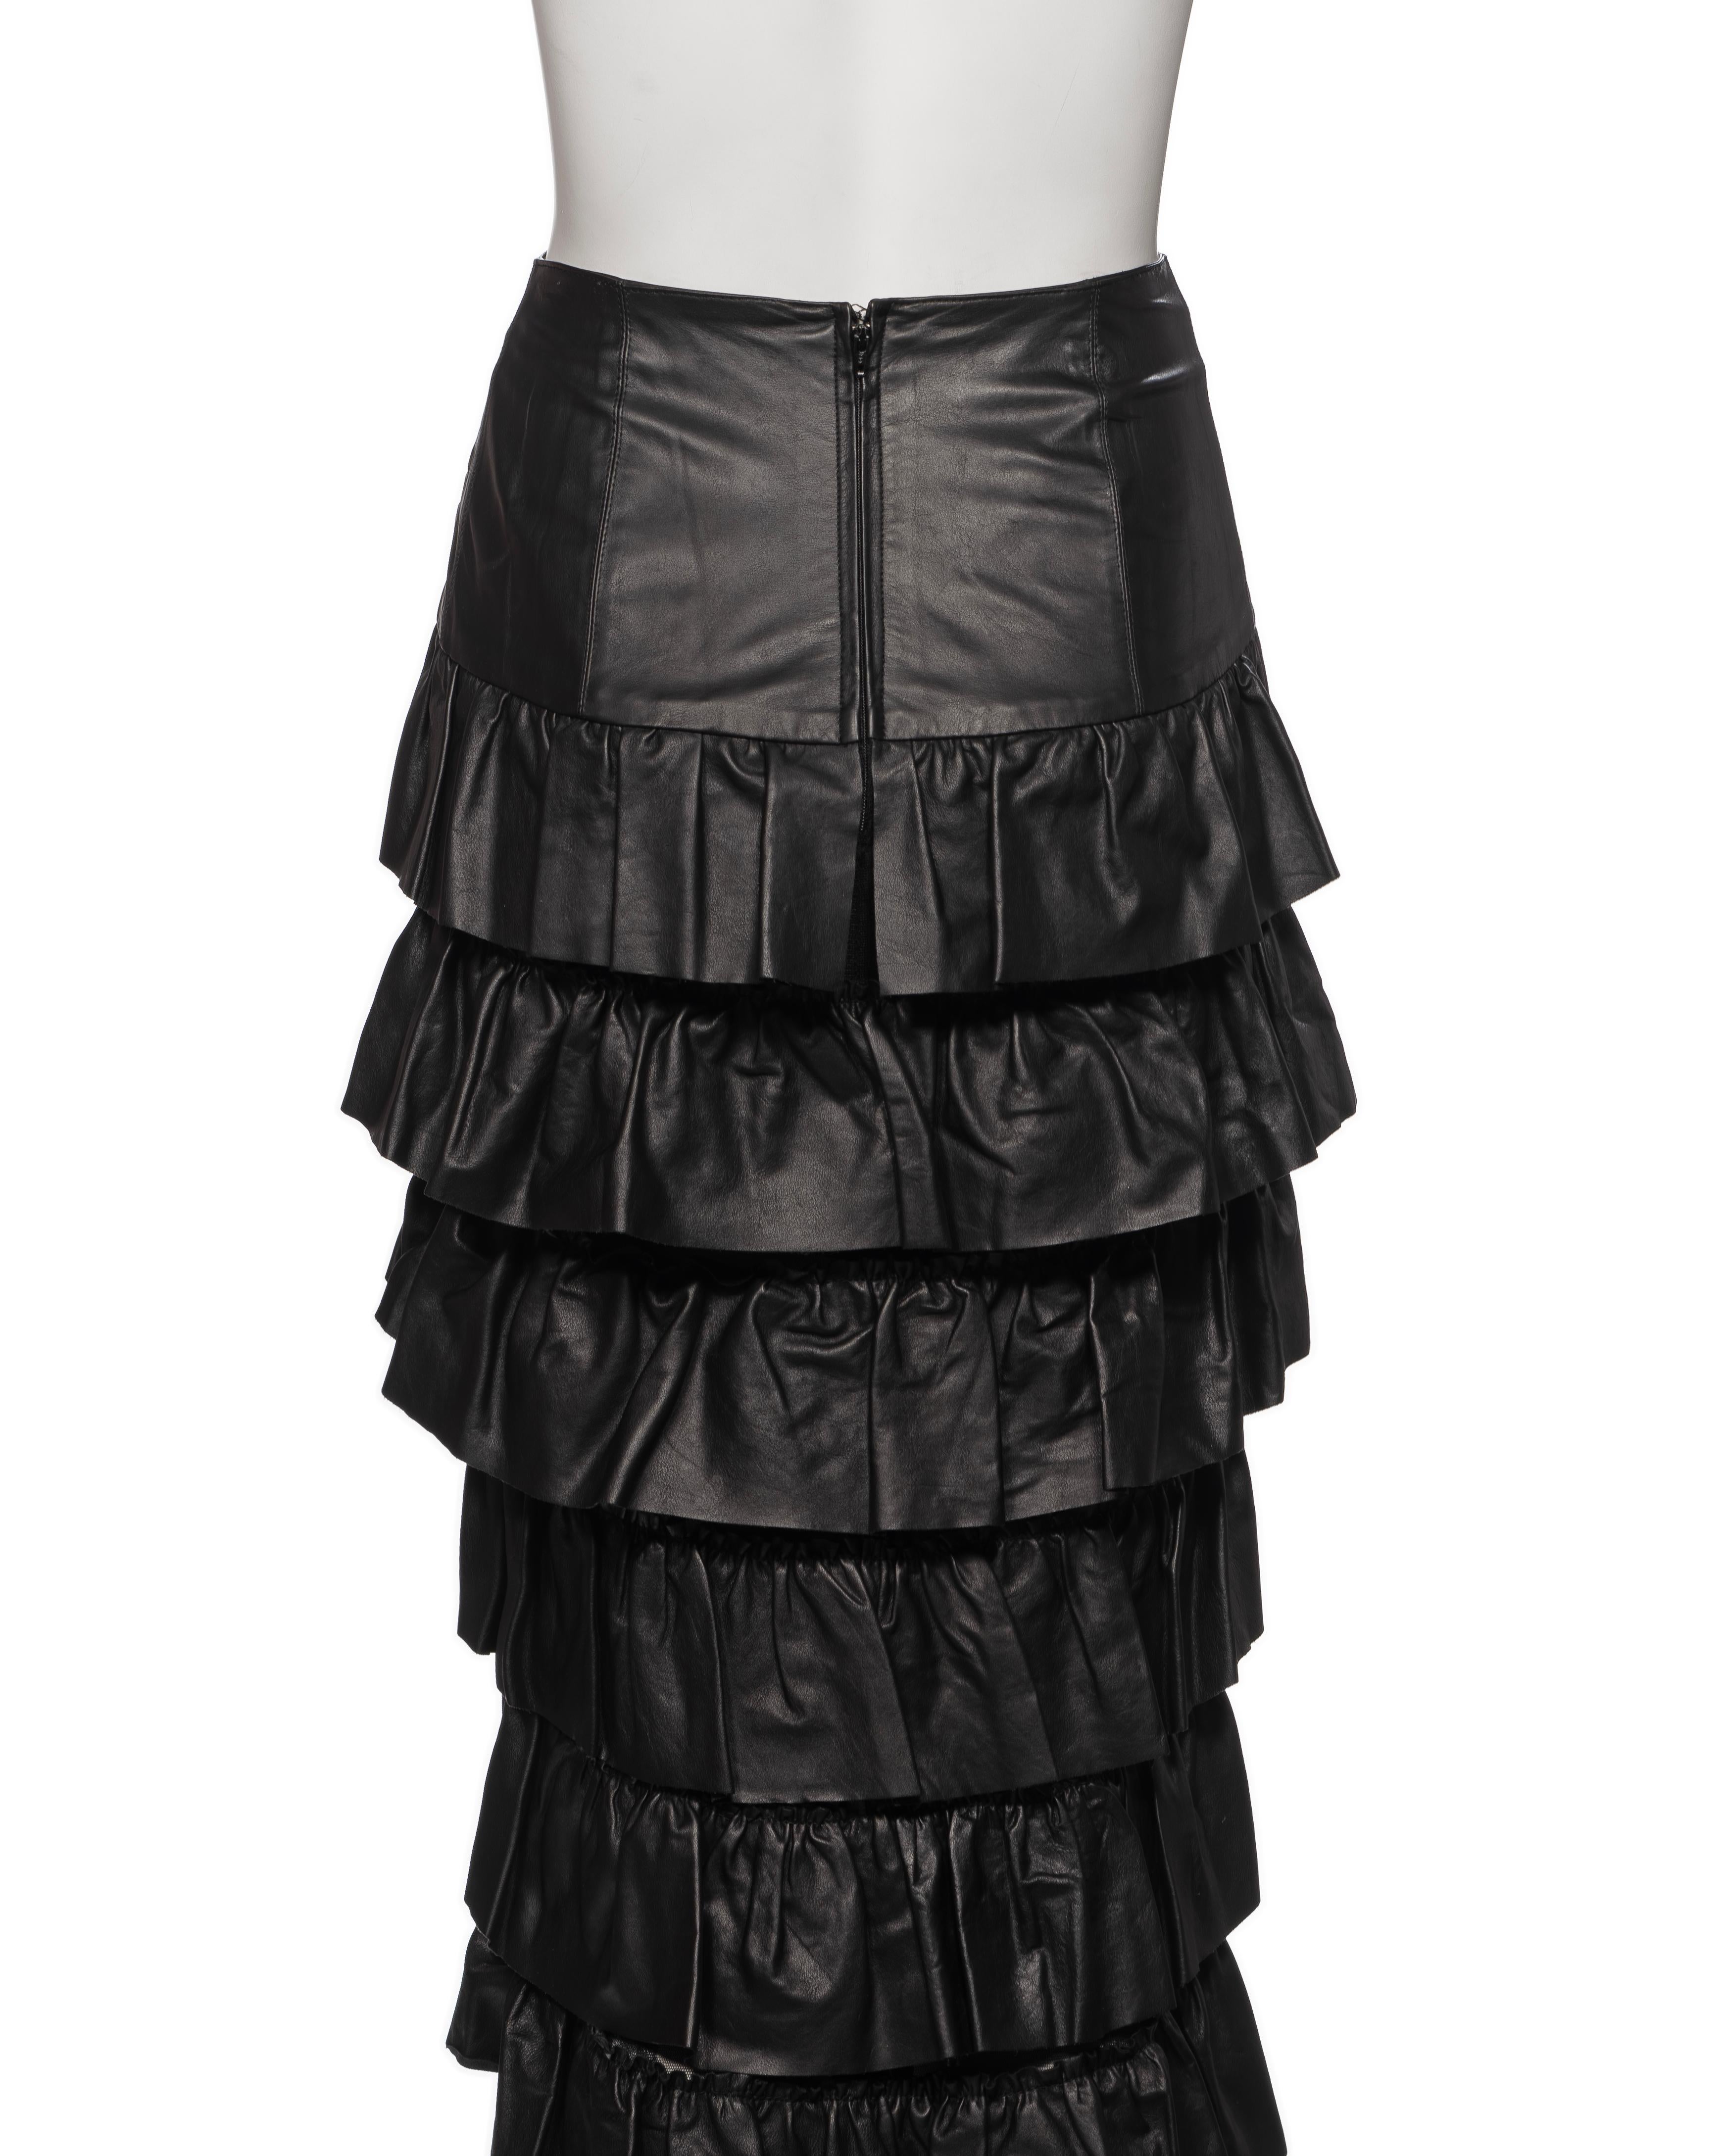 Chanel by Karl Lagerfeld Black Leather Tiered Ruffled Maxi Skirt, FW 2001 For Sale 7